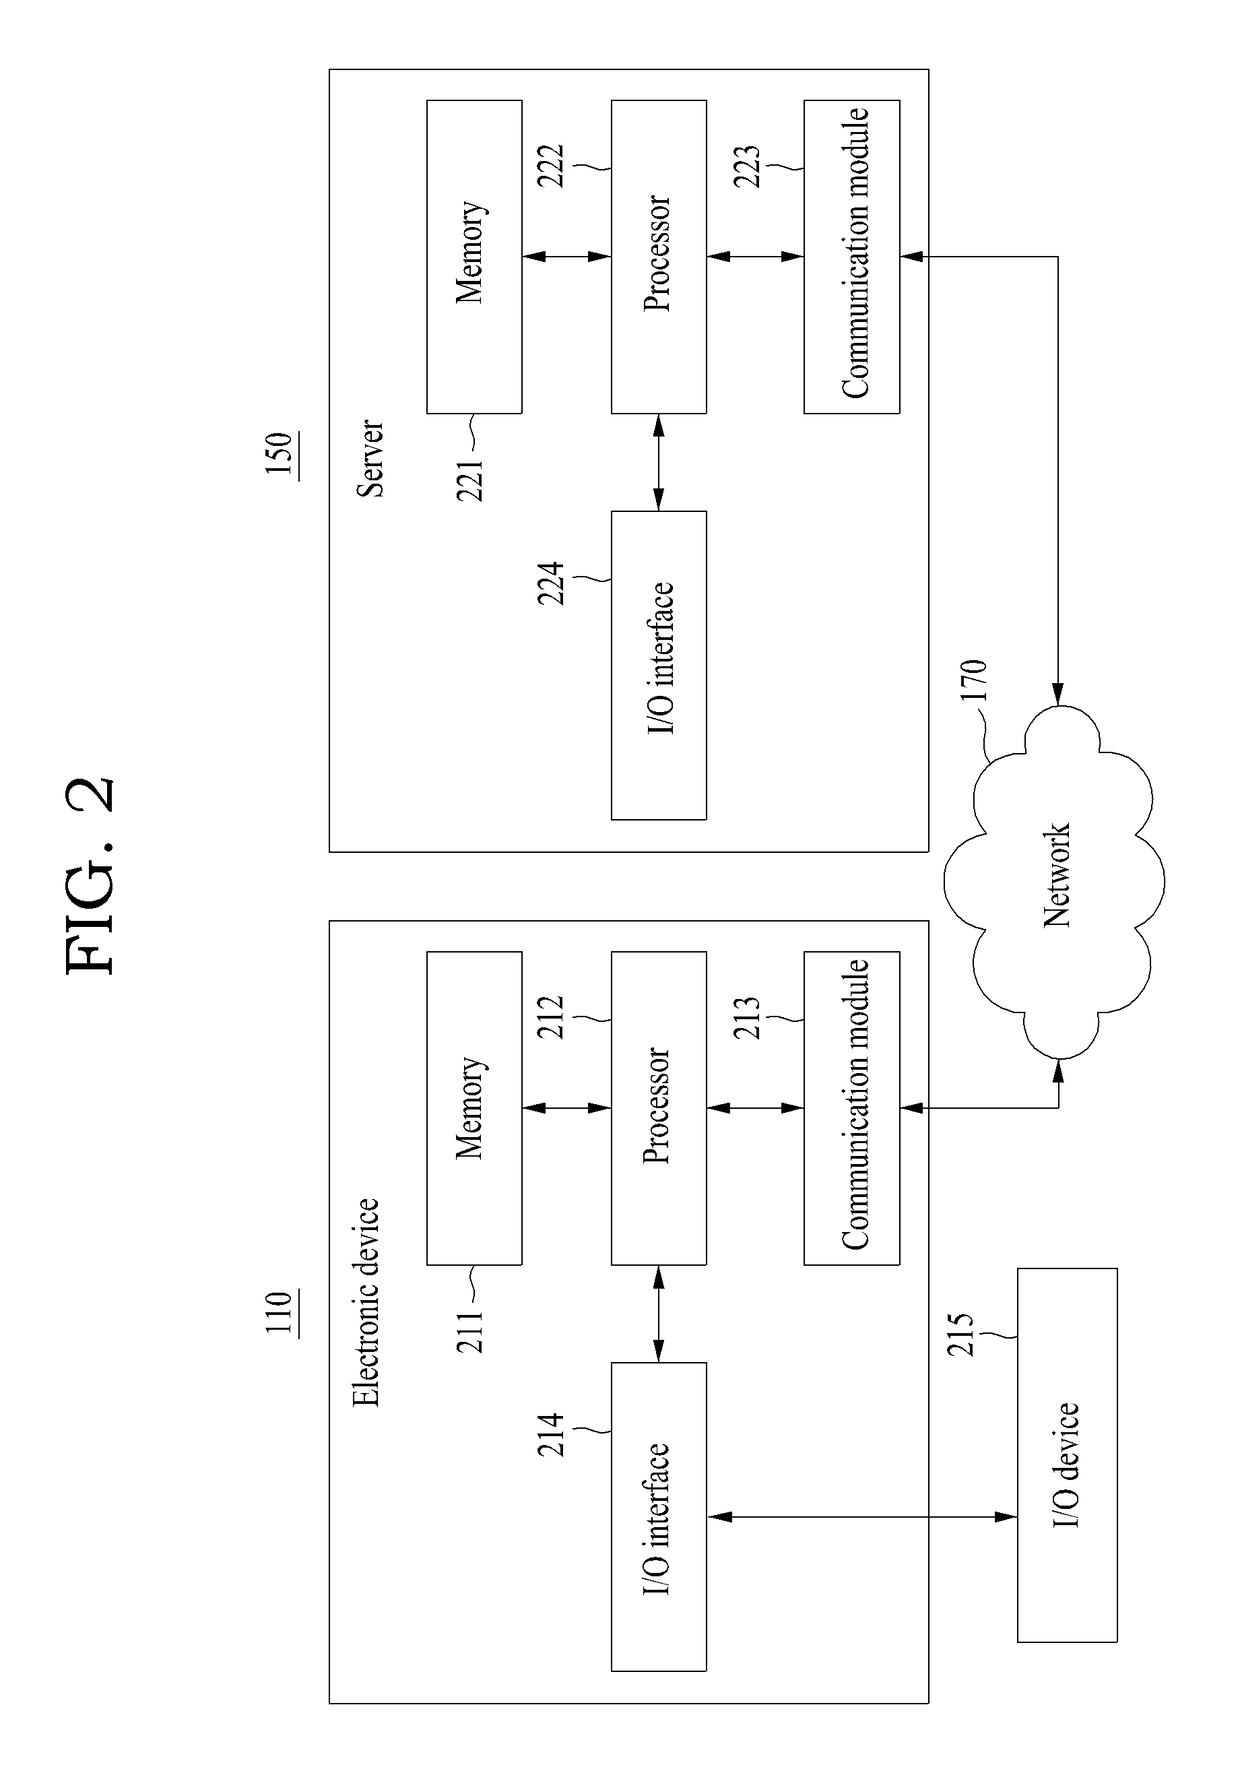 Methods, apparatuses, systems, and non-transitory computer readable media for image trend detection and curation of image